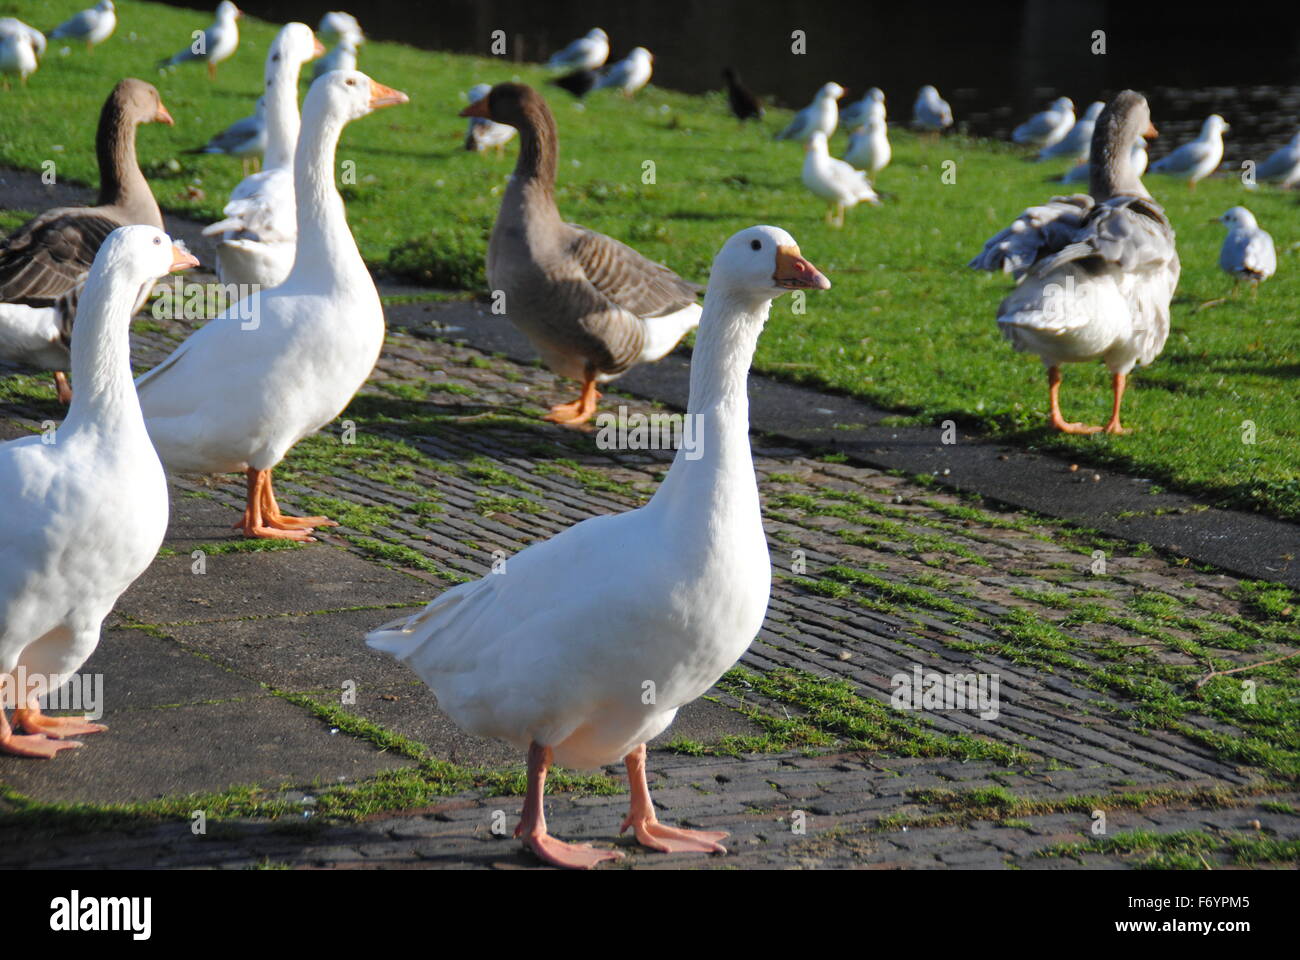 Wild Geese, in our park Stock Photo